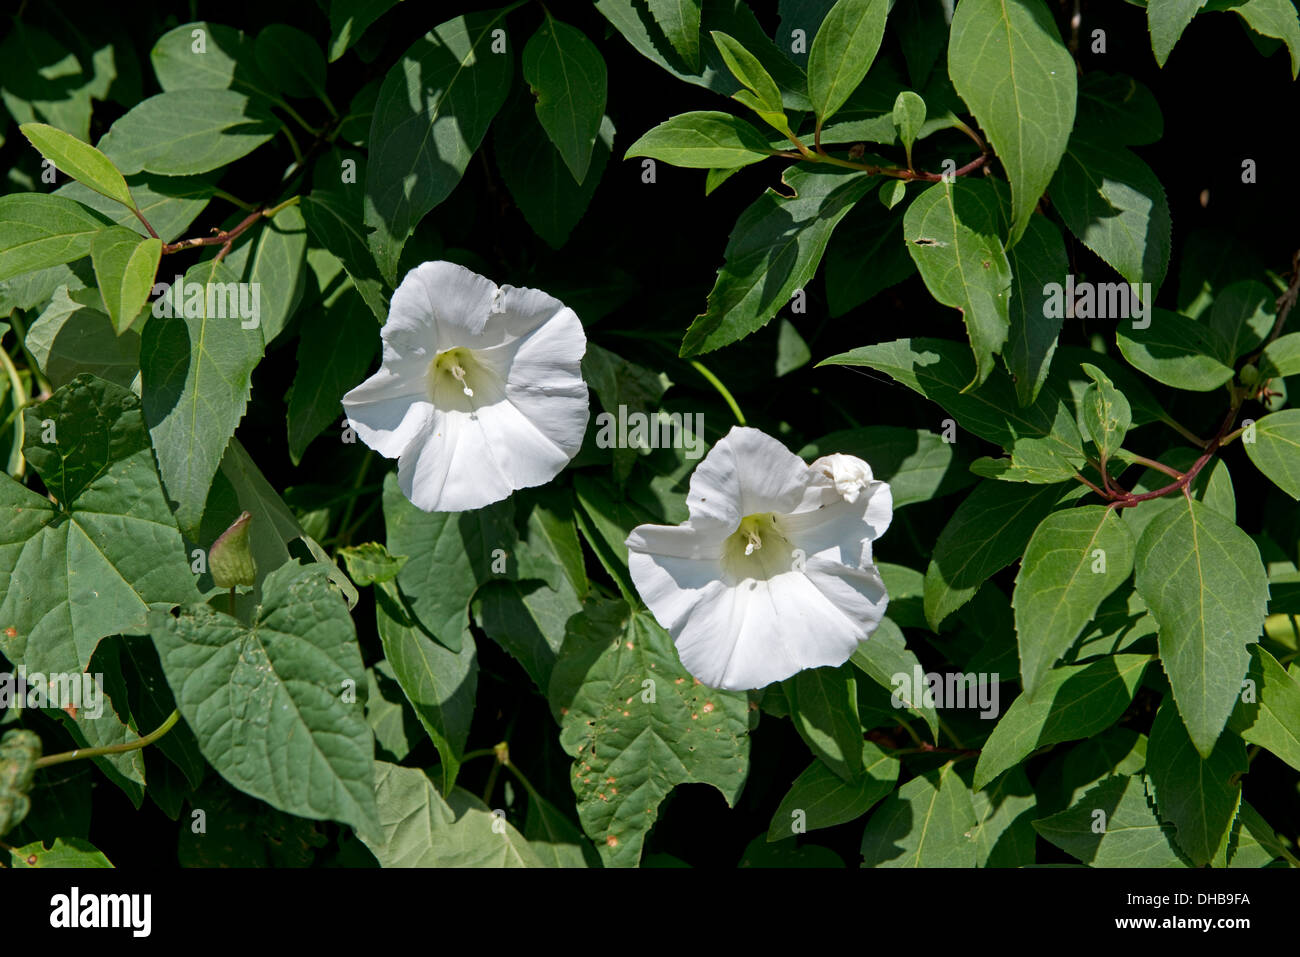 Greater bindweed, Calystegia sepium, flowers on a plant intertwined with a garden shrub, Devon, July Stock Photo